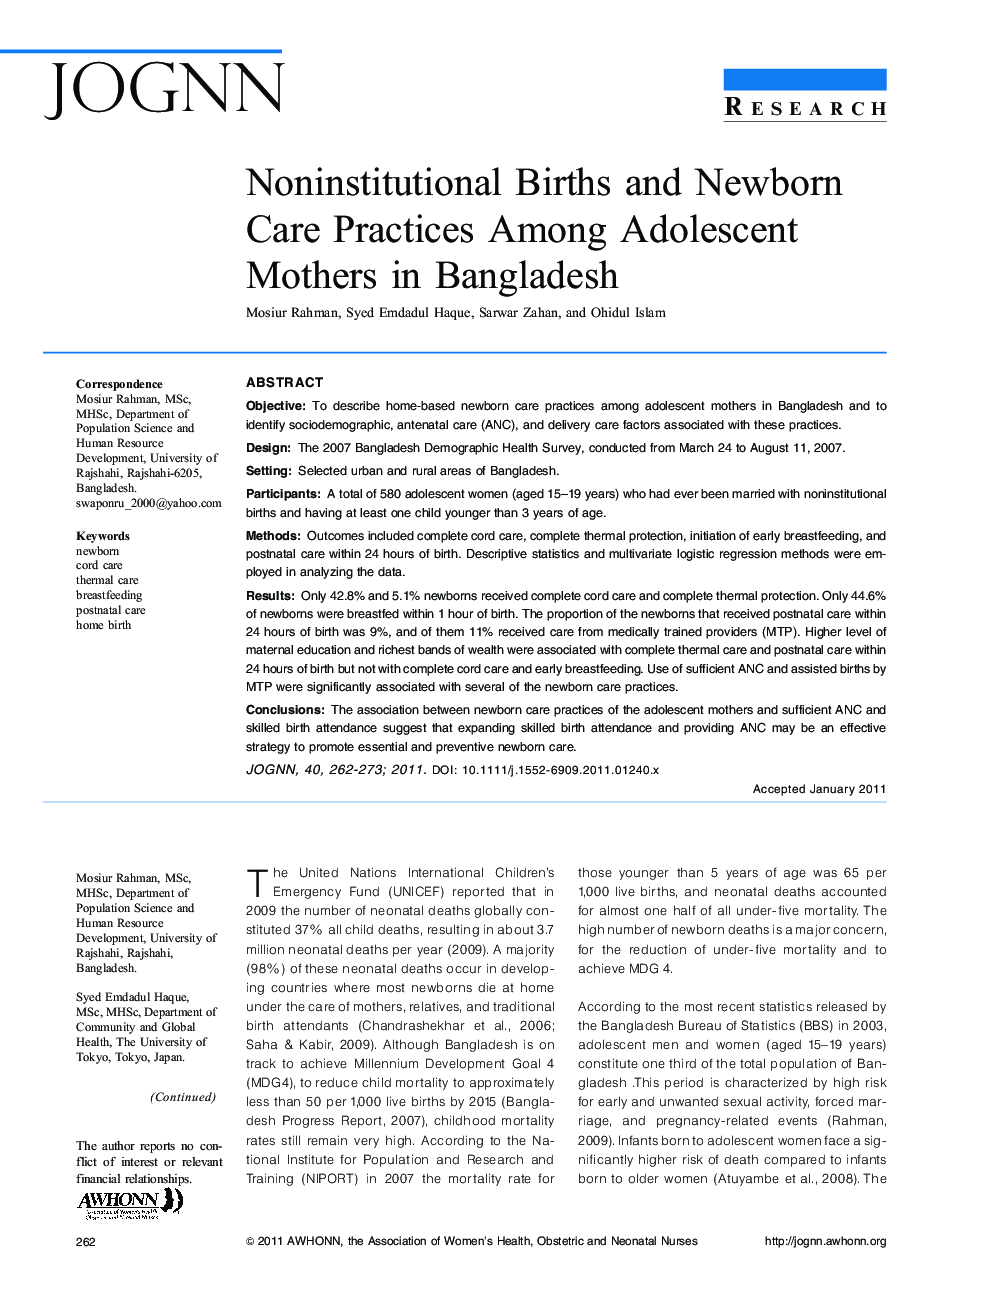 Noninstitutional Births and Newborn Care Practices Among Adolescent Mothers in Bangladesh